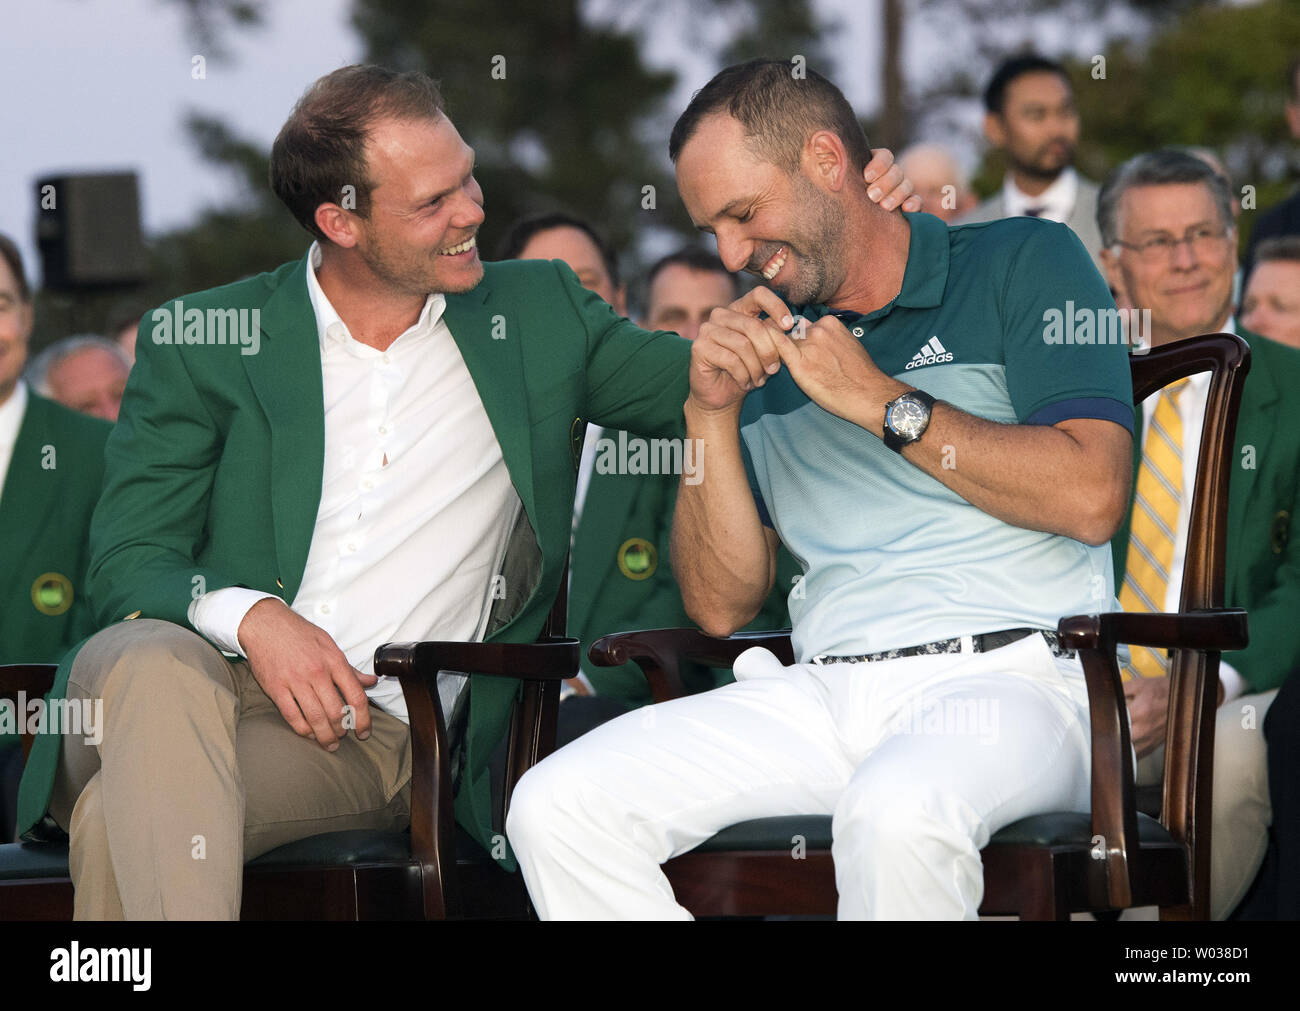 Sergio Garcia (R) is congratulated by 2016 Masters Champion Danny Willett  after Garcia won the 2017 Masters Tournament at Augusta National Golf Club  in Augusta, Georgia on April 9, 2017. Garcia beat out Justin Rose by one  stoke in a one hole playoff ...